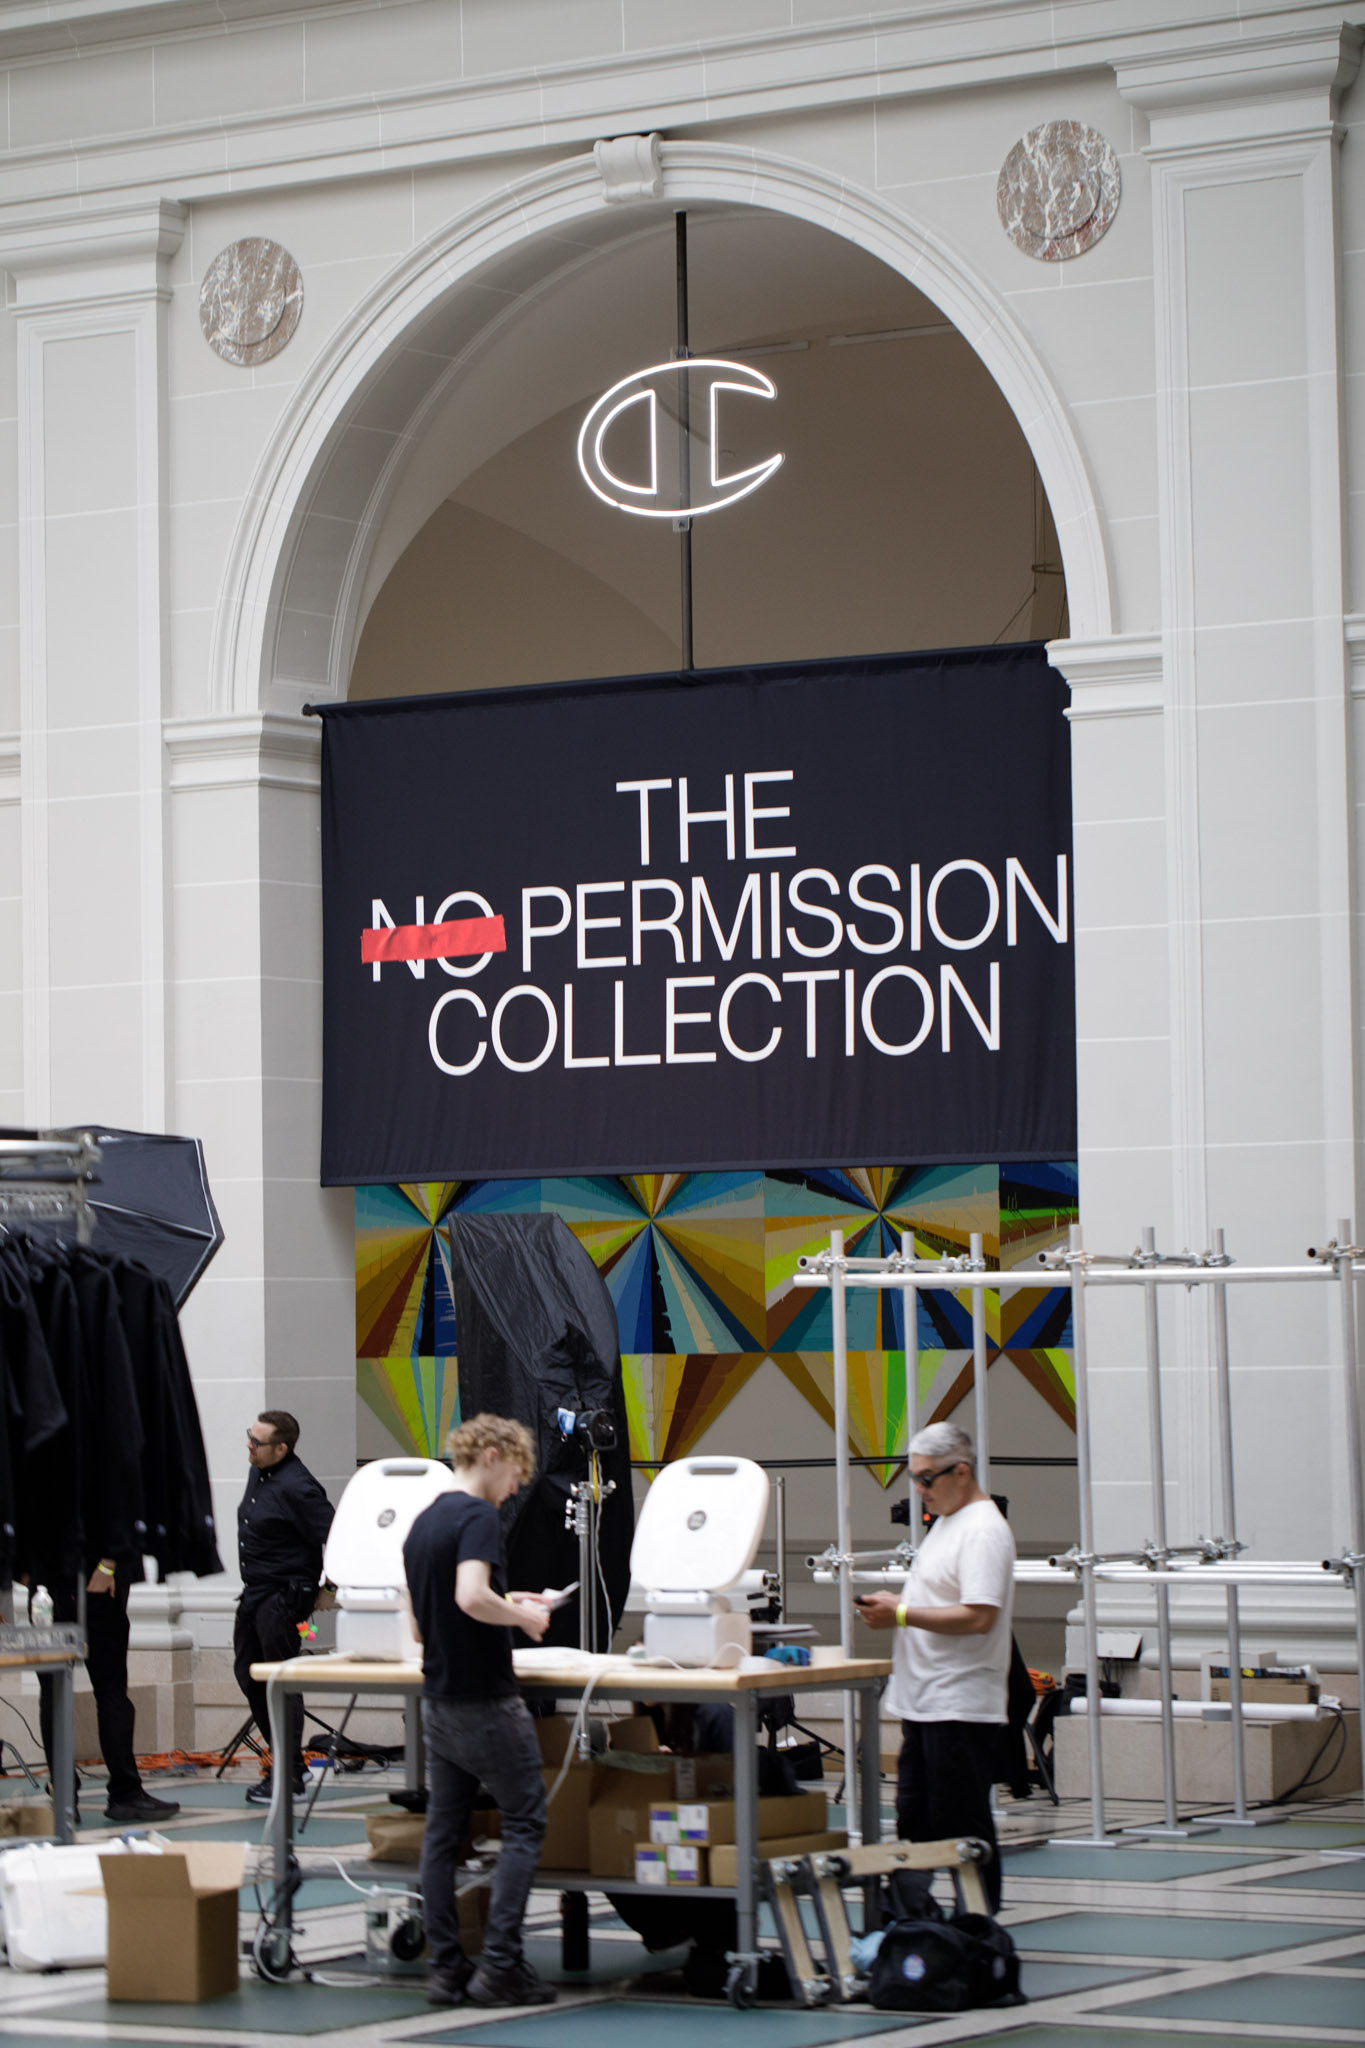 Champion No Permission exhibit at the brooklyn museum